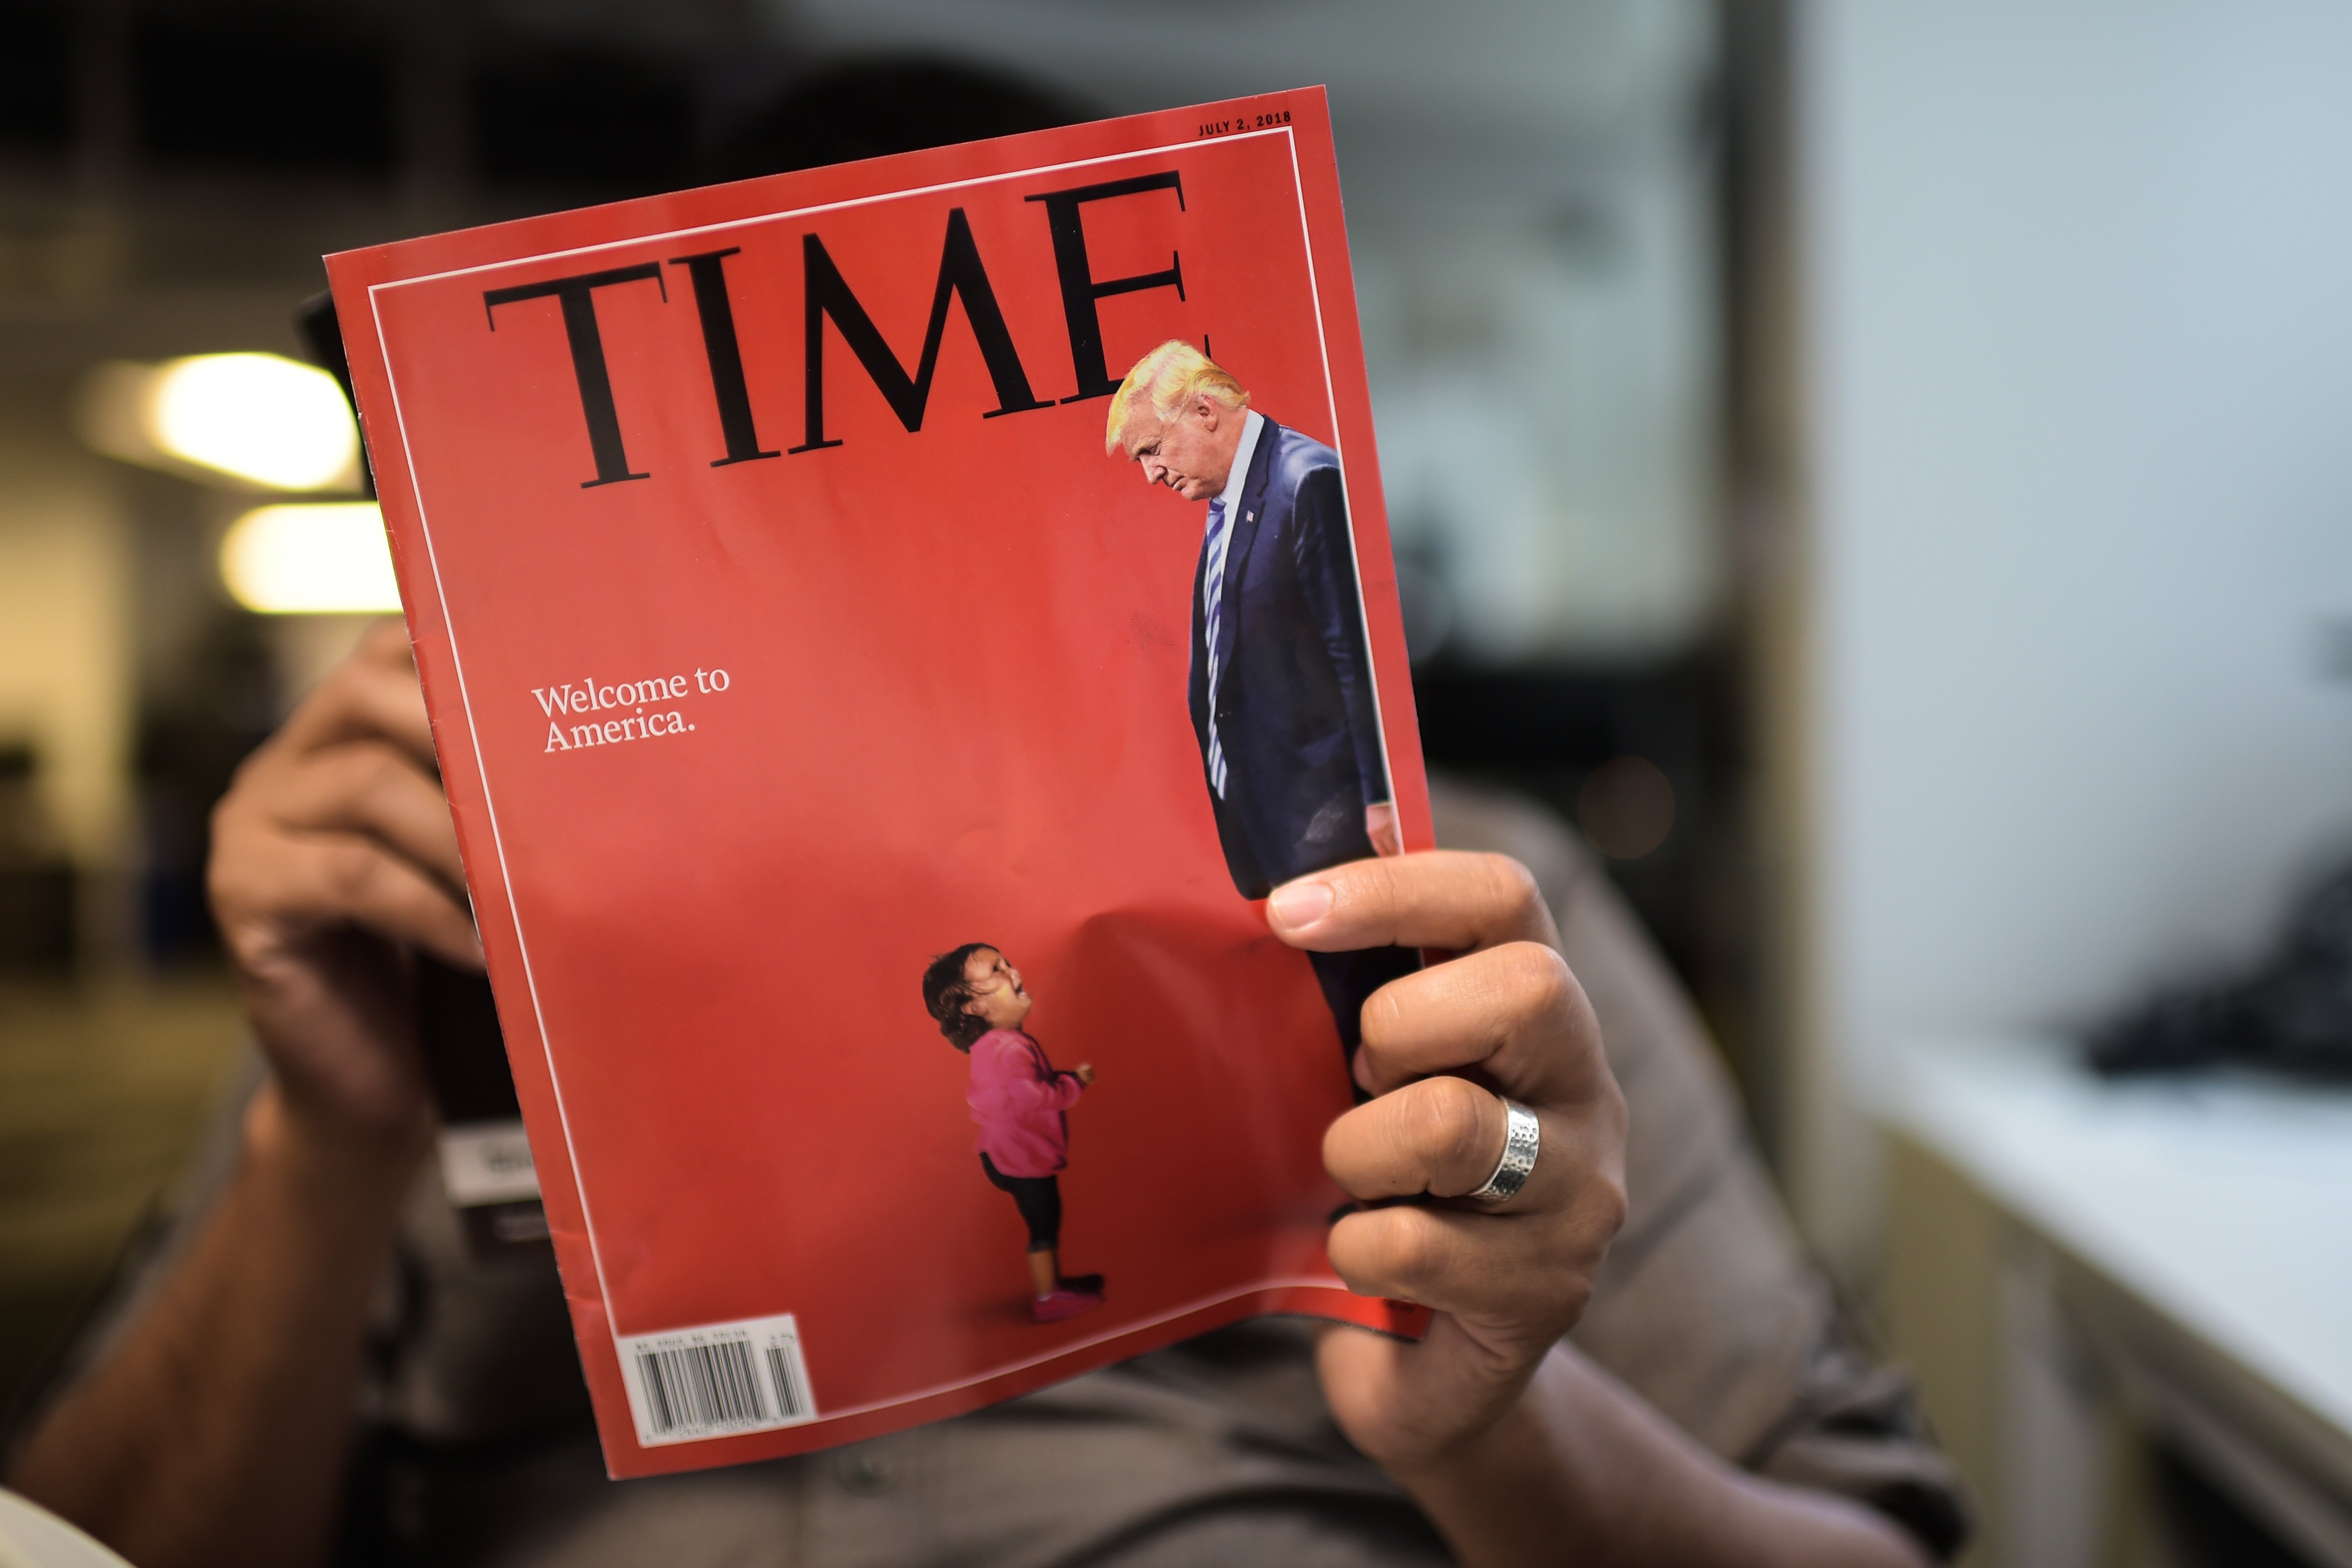 Person reading a June 2019 Time magazine with Donald Trump and crying child on cover